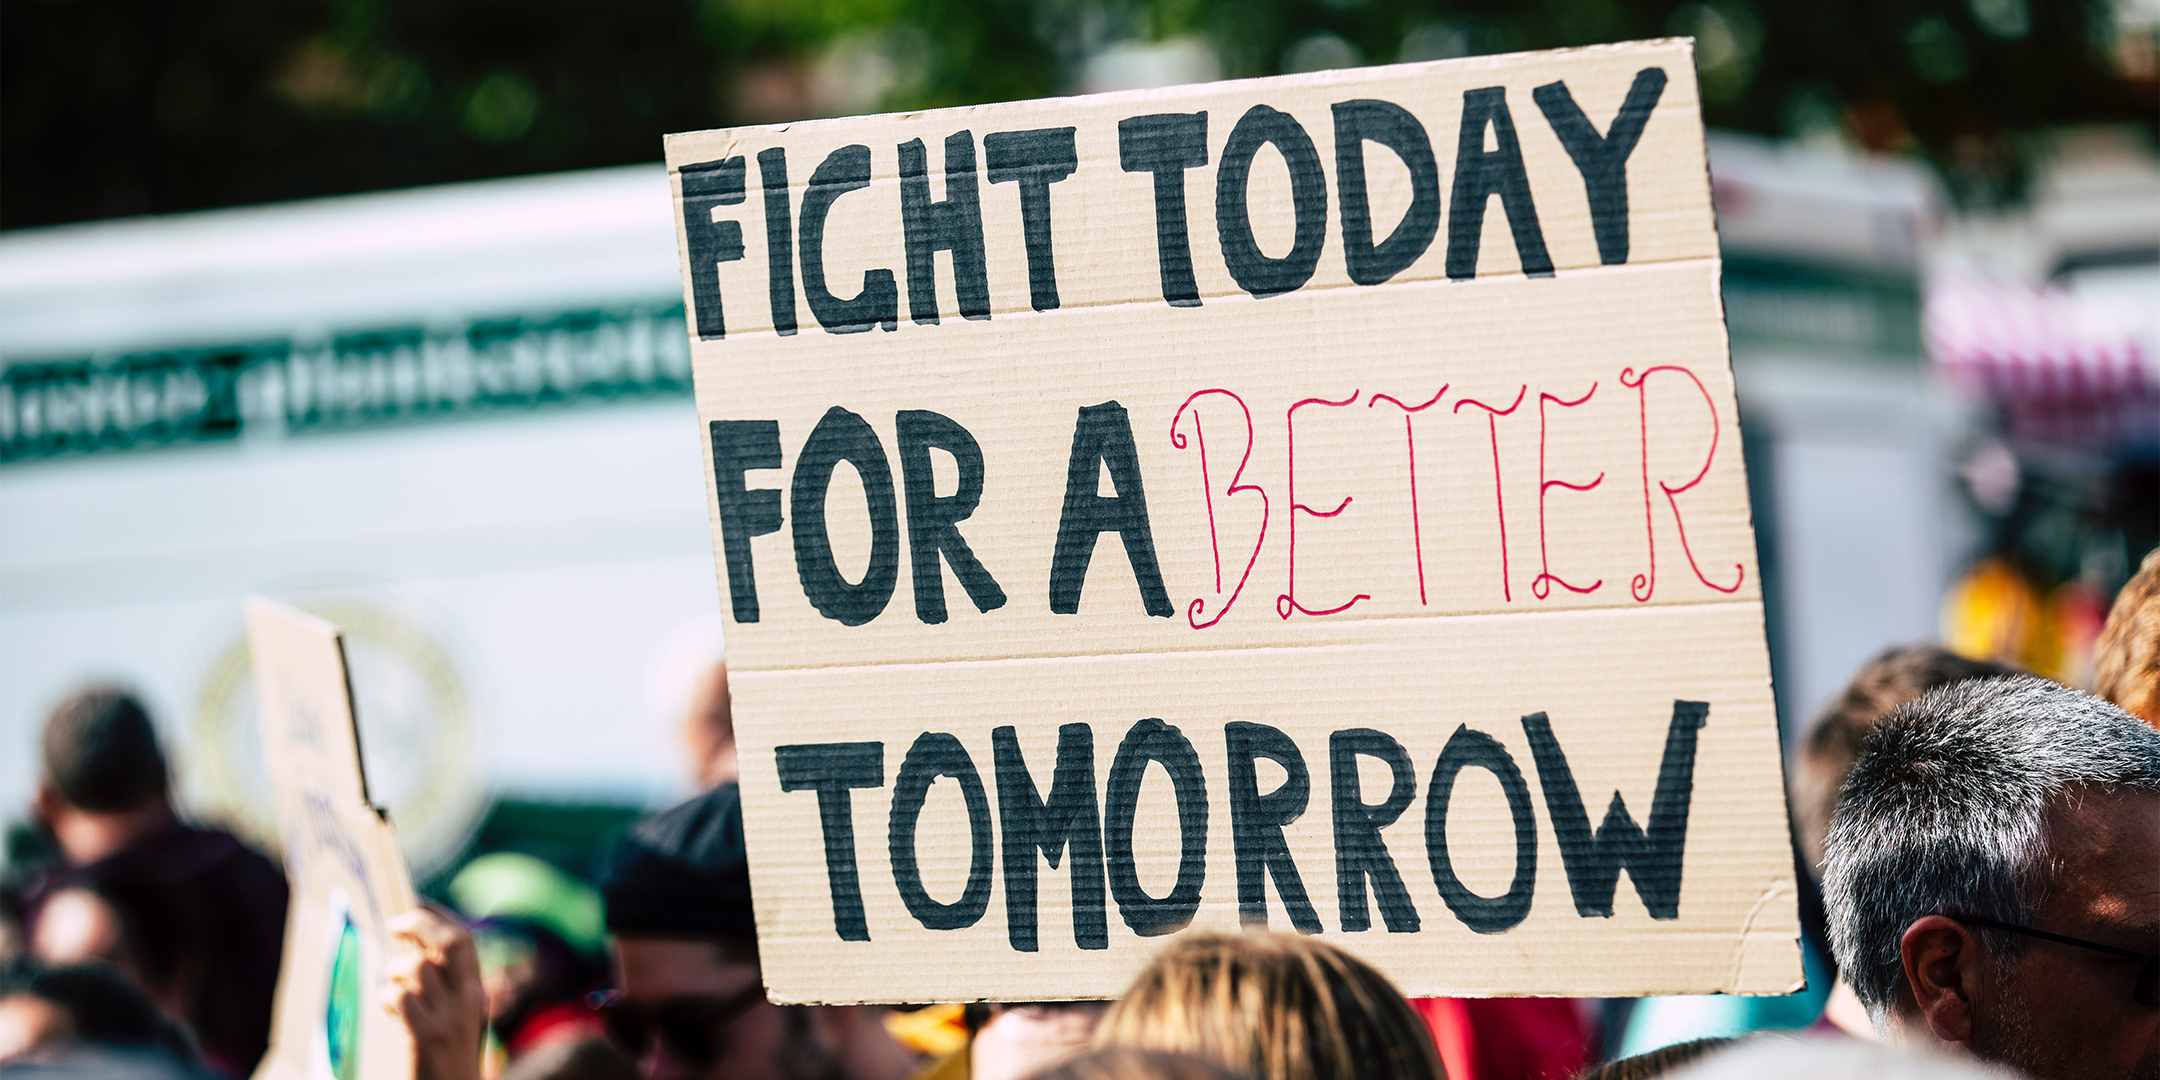 A crowd at a protest with a sign that says "Fight today for a better tomorrow"